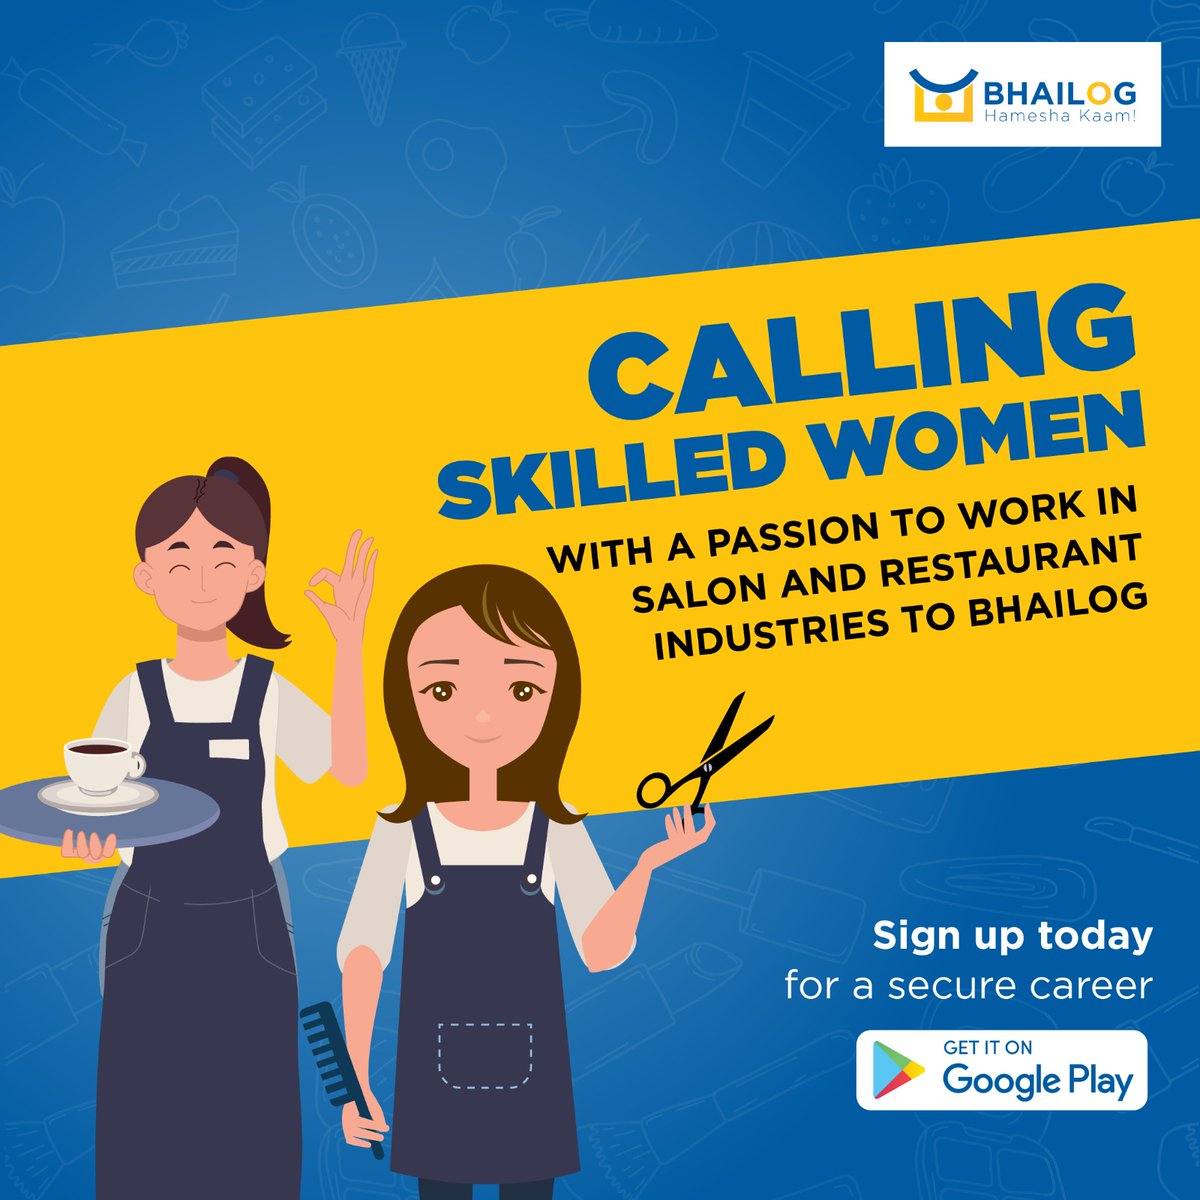 Calling skilled women with a passion to work in salon and restaurant industries to Bhailog. Sign up today for a secure career.
.
.
.
.

#WomenInIndustry #SkilledWomen #SalonCareers #RestaurantJobs #SecureFuture #CareerOpportunity #EmpoweringWomen #JobProspects #BhailogOpportunity